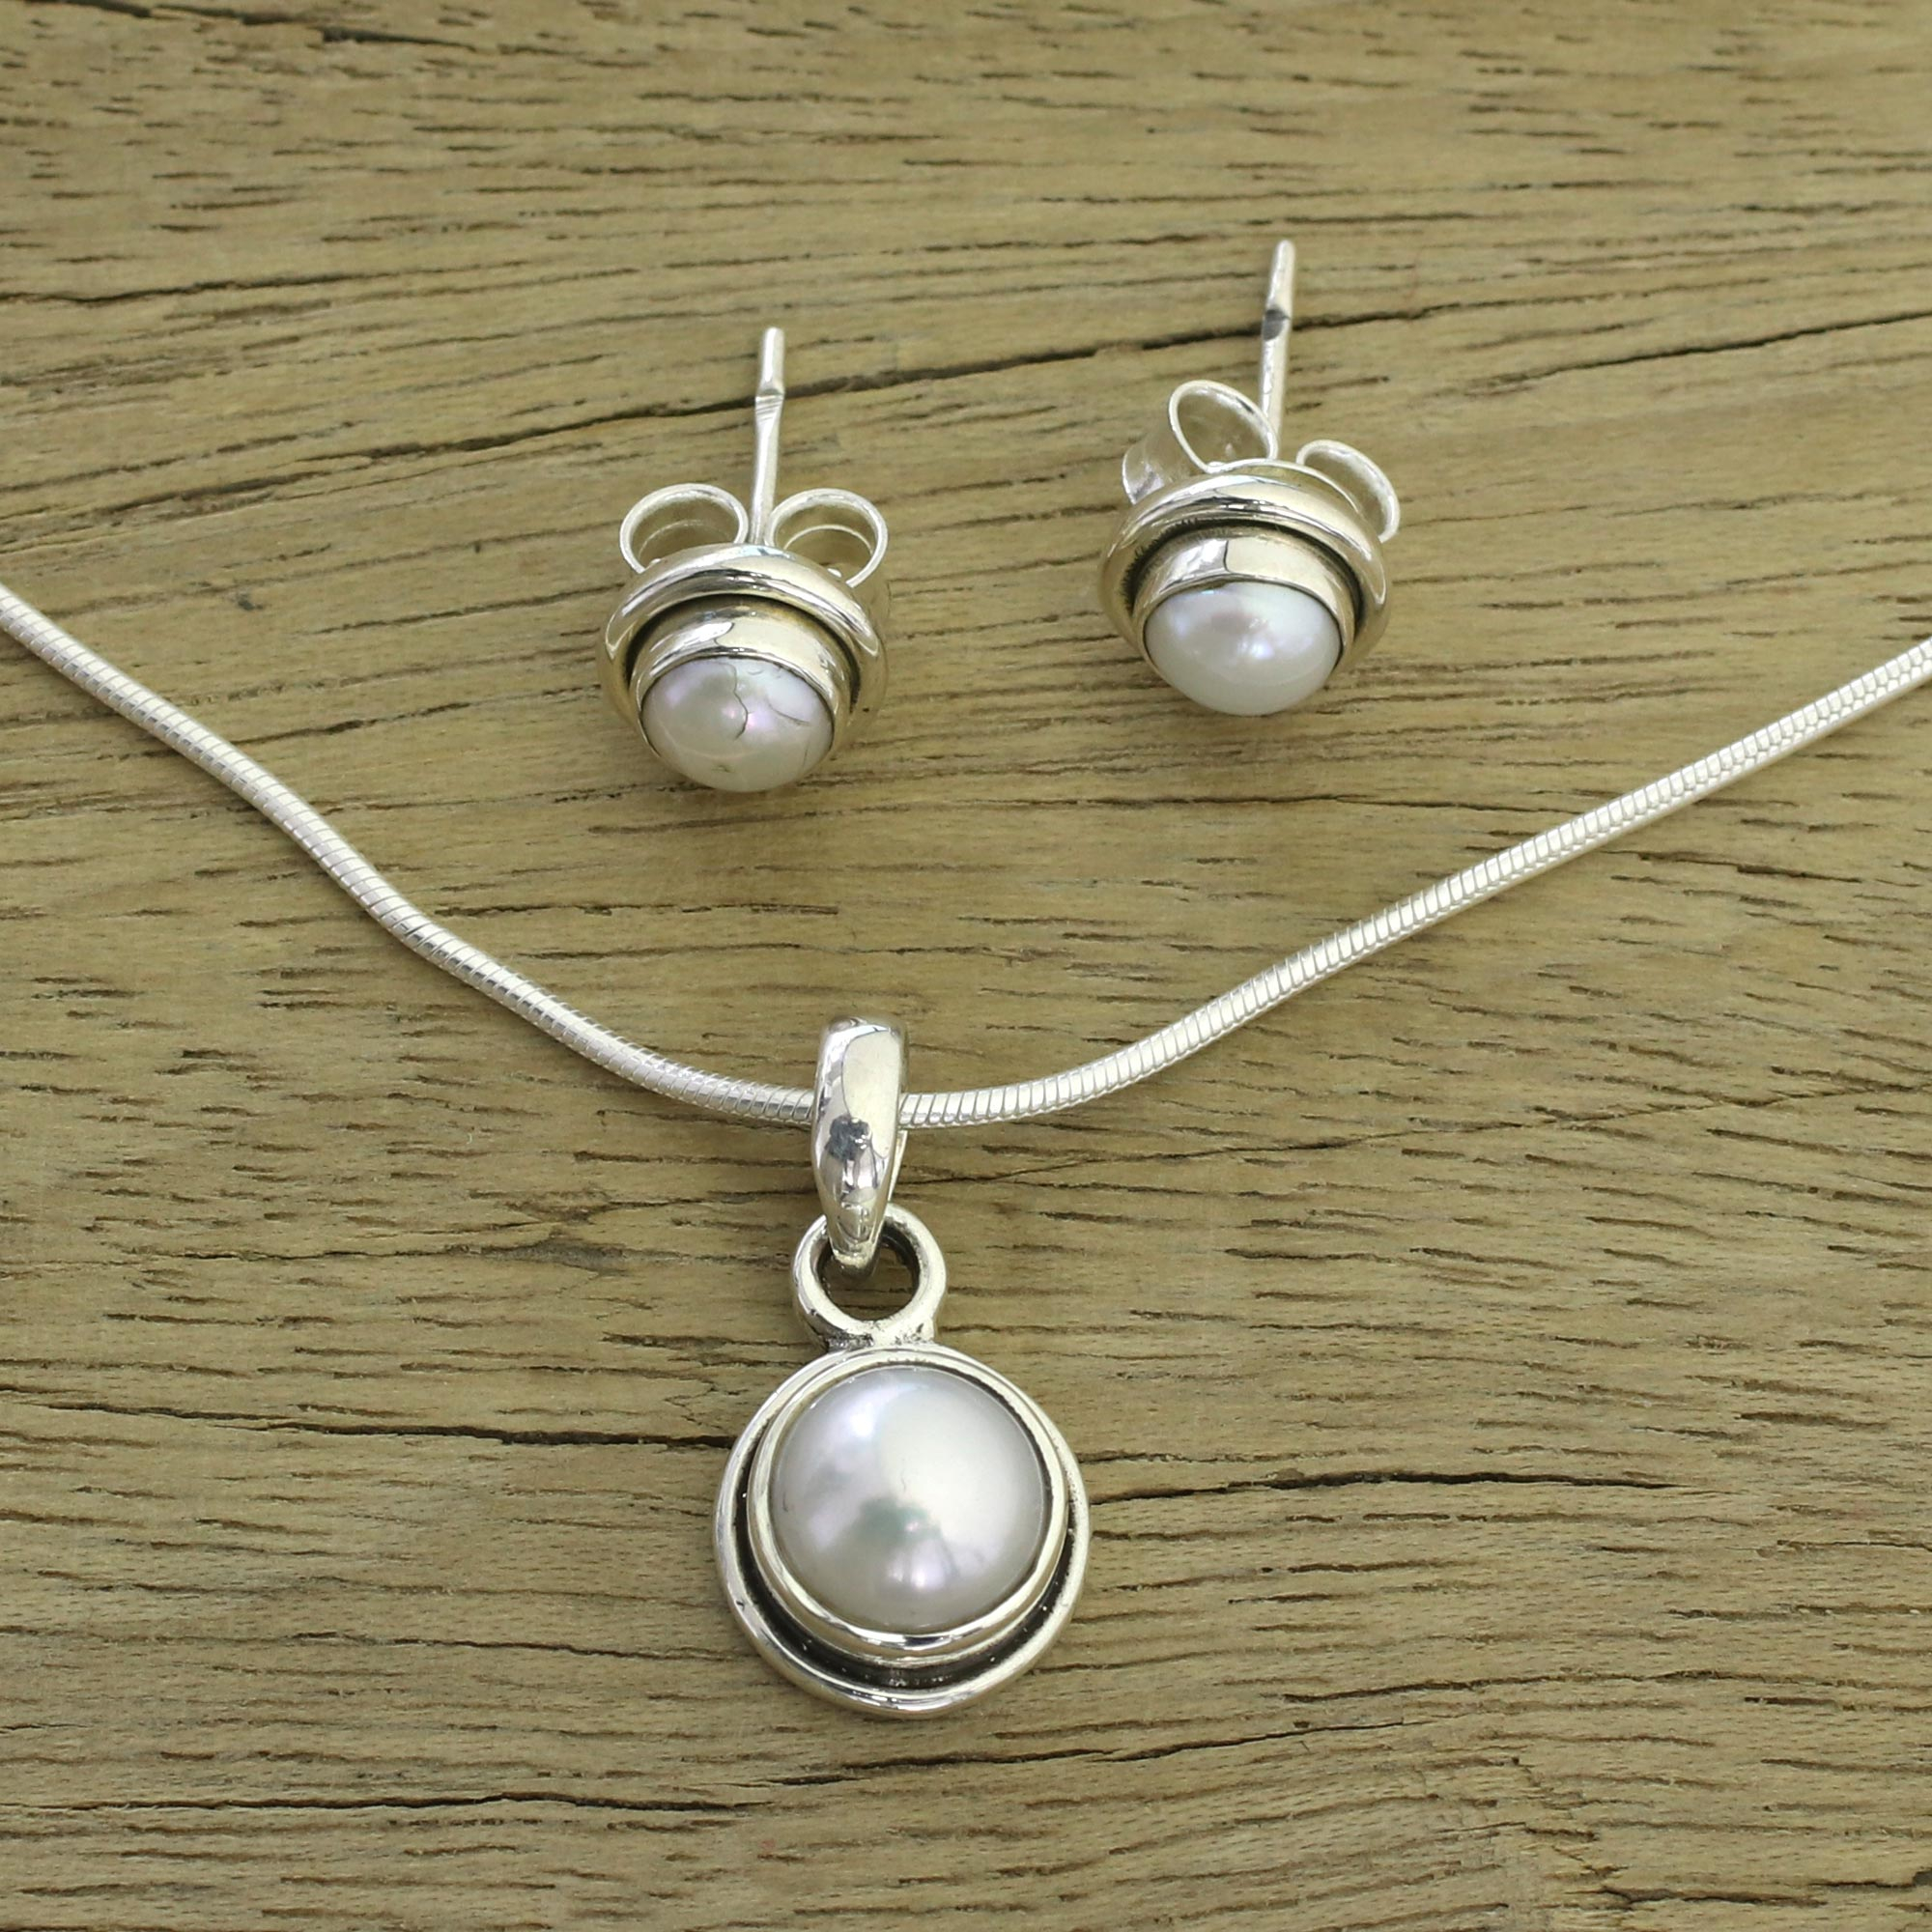 NOVICA White Cultured Freshwater Pearl .925 Sterling Silver Necklace 19.75 White Passion Fruit 